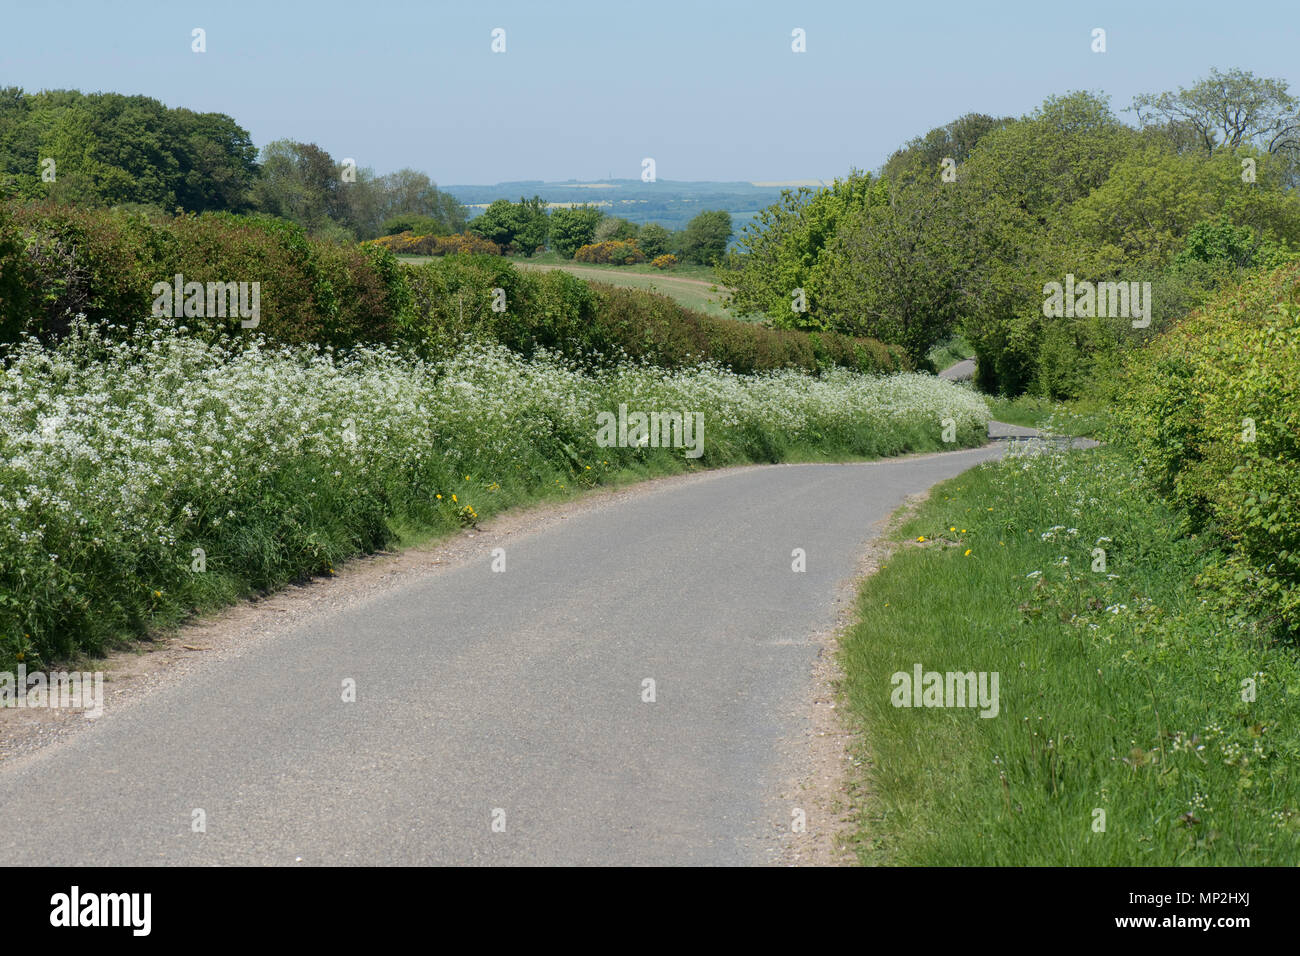 Cow parsley, Anthriscus sylvestris, flowering on a country road with hedges and trees in spring green , May Stock Photo